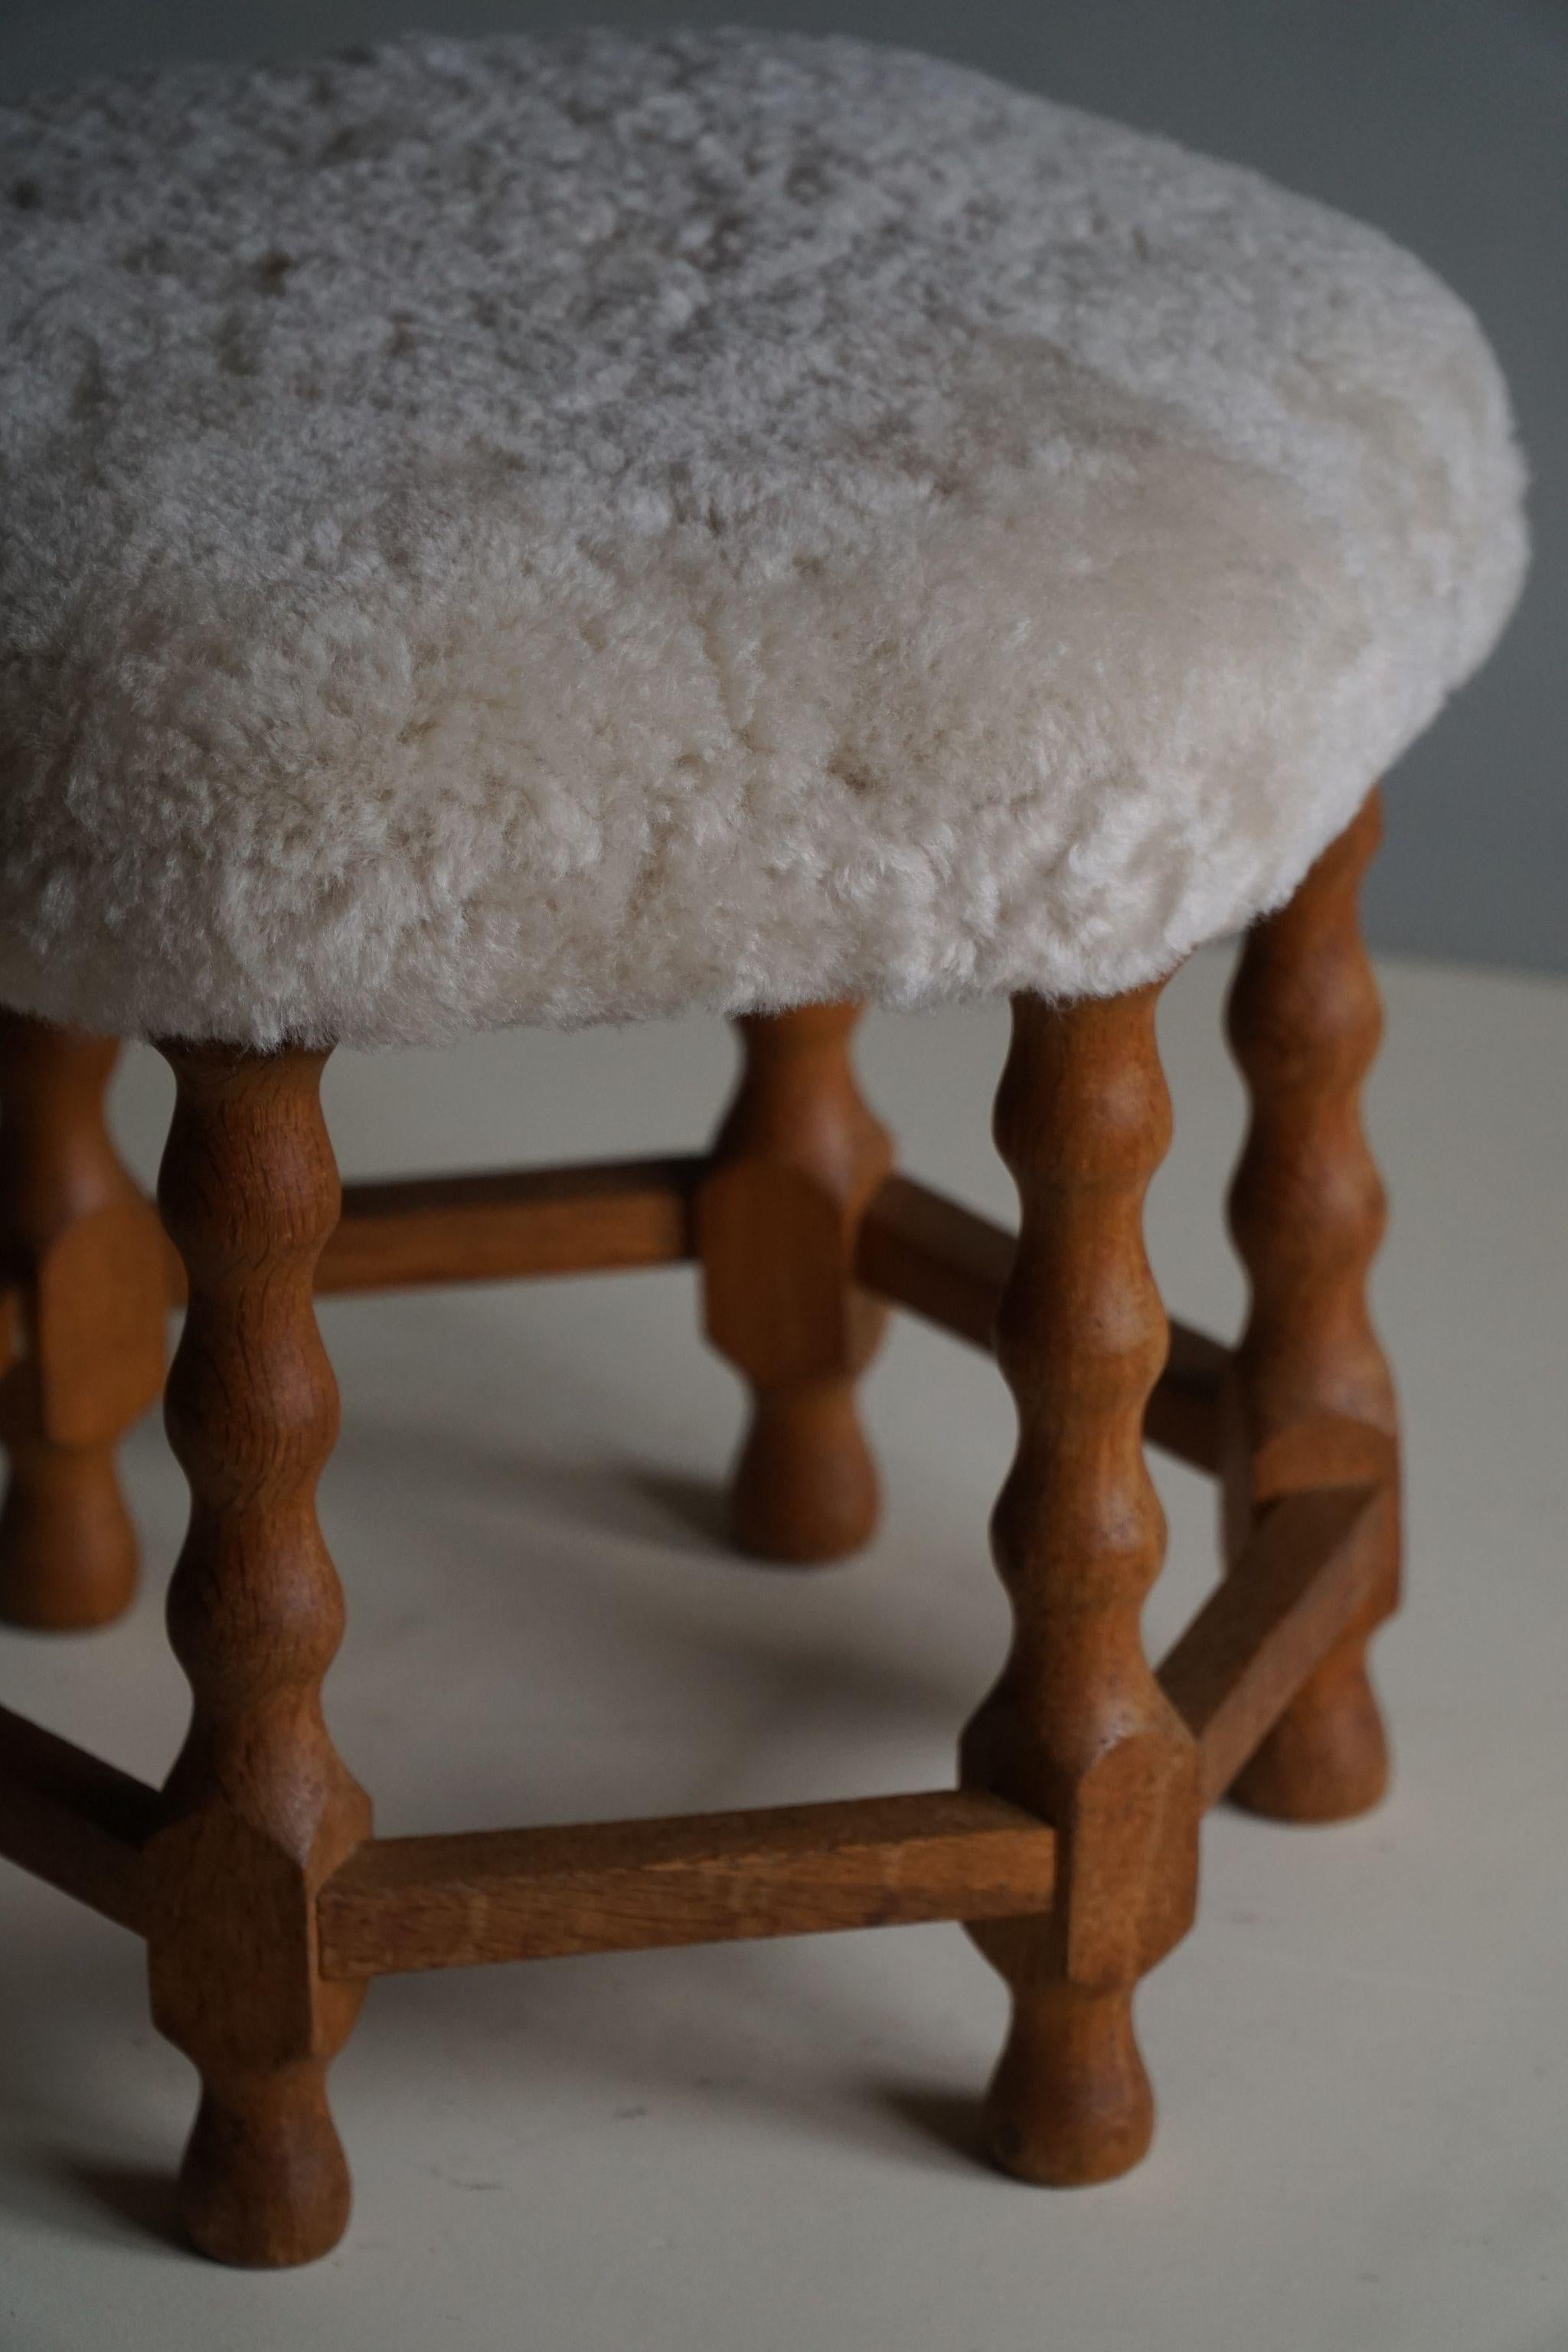 Danish Modern, A Hexagon Stool in Oak, Reupholstered Seat in Lambswool, 1950s For Sale 3